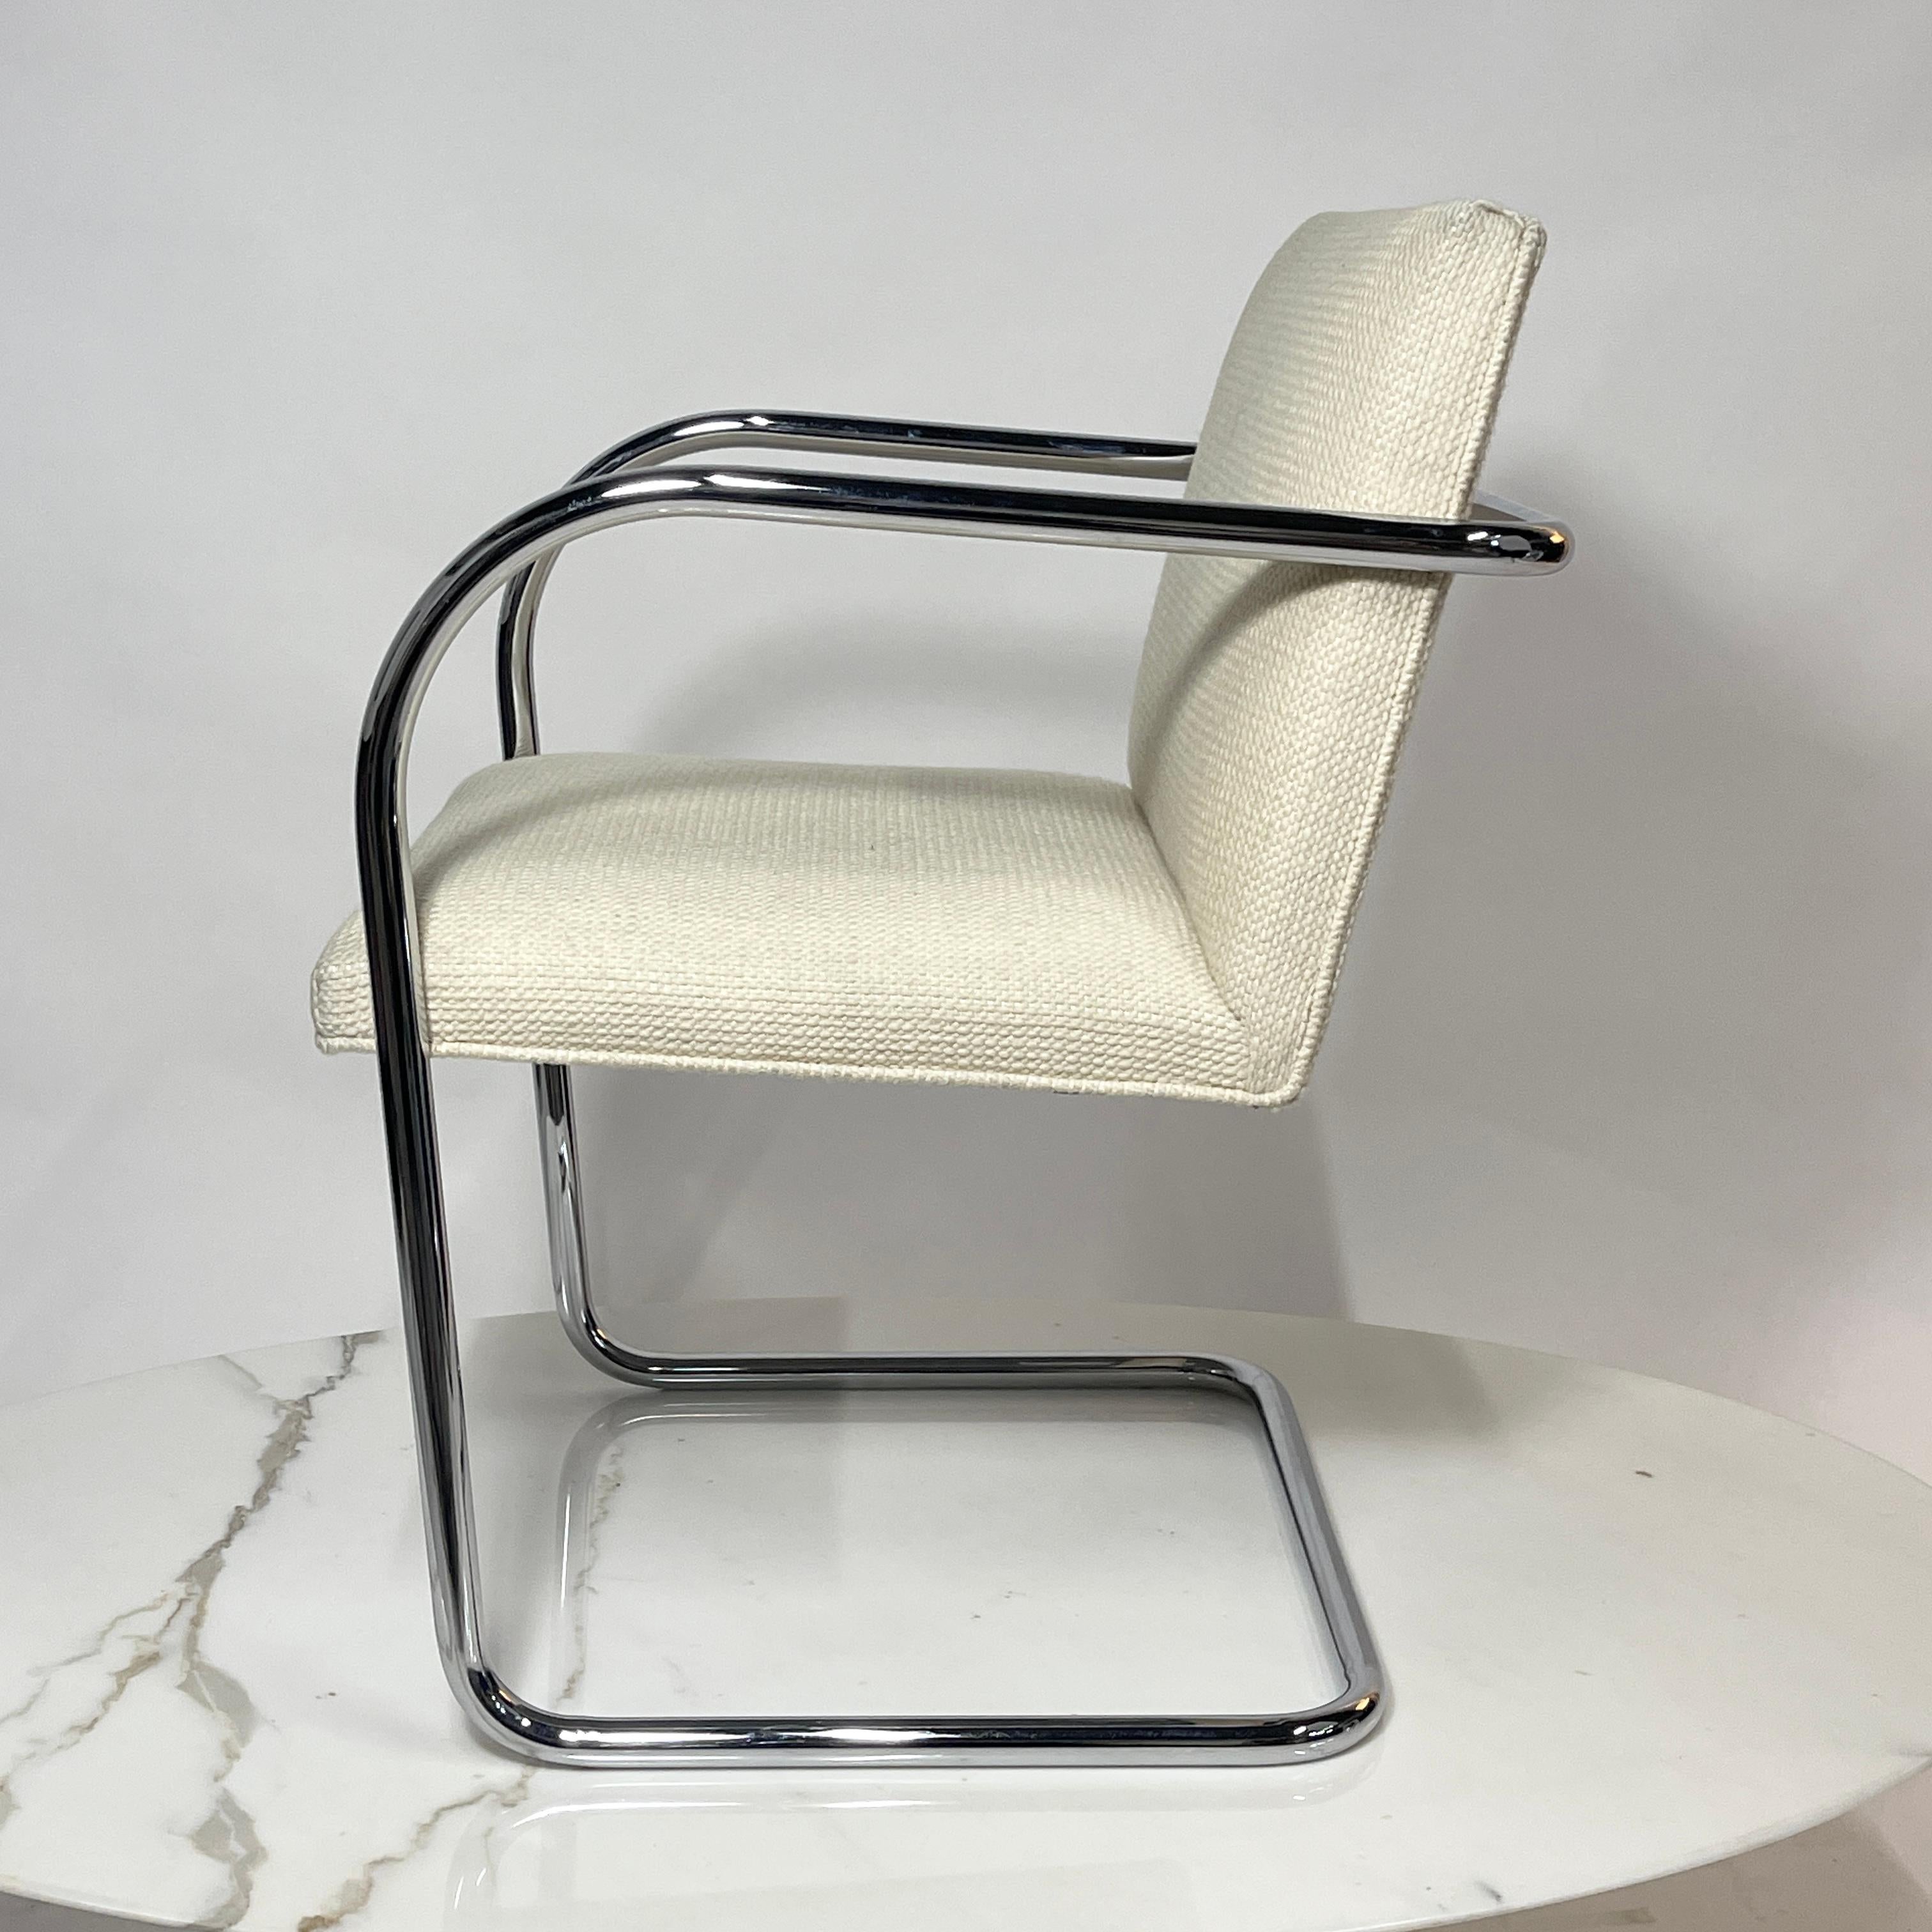 Polished Mies Van Der Rohe for Knoll Brno Chair in Cato Upholstery 60 available For Sale